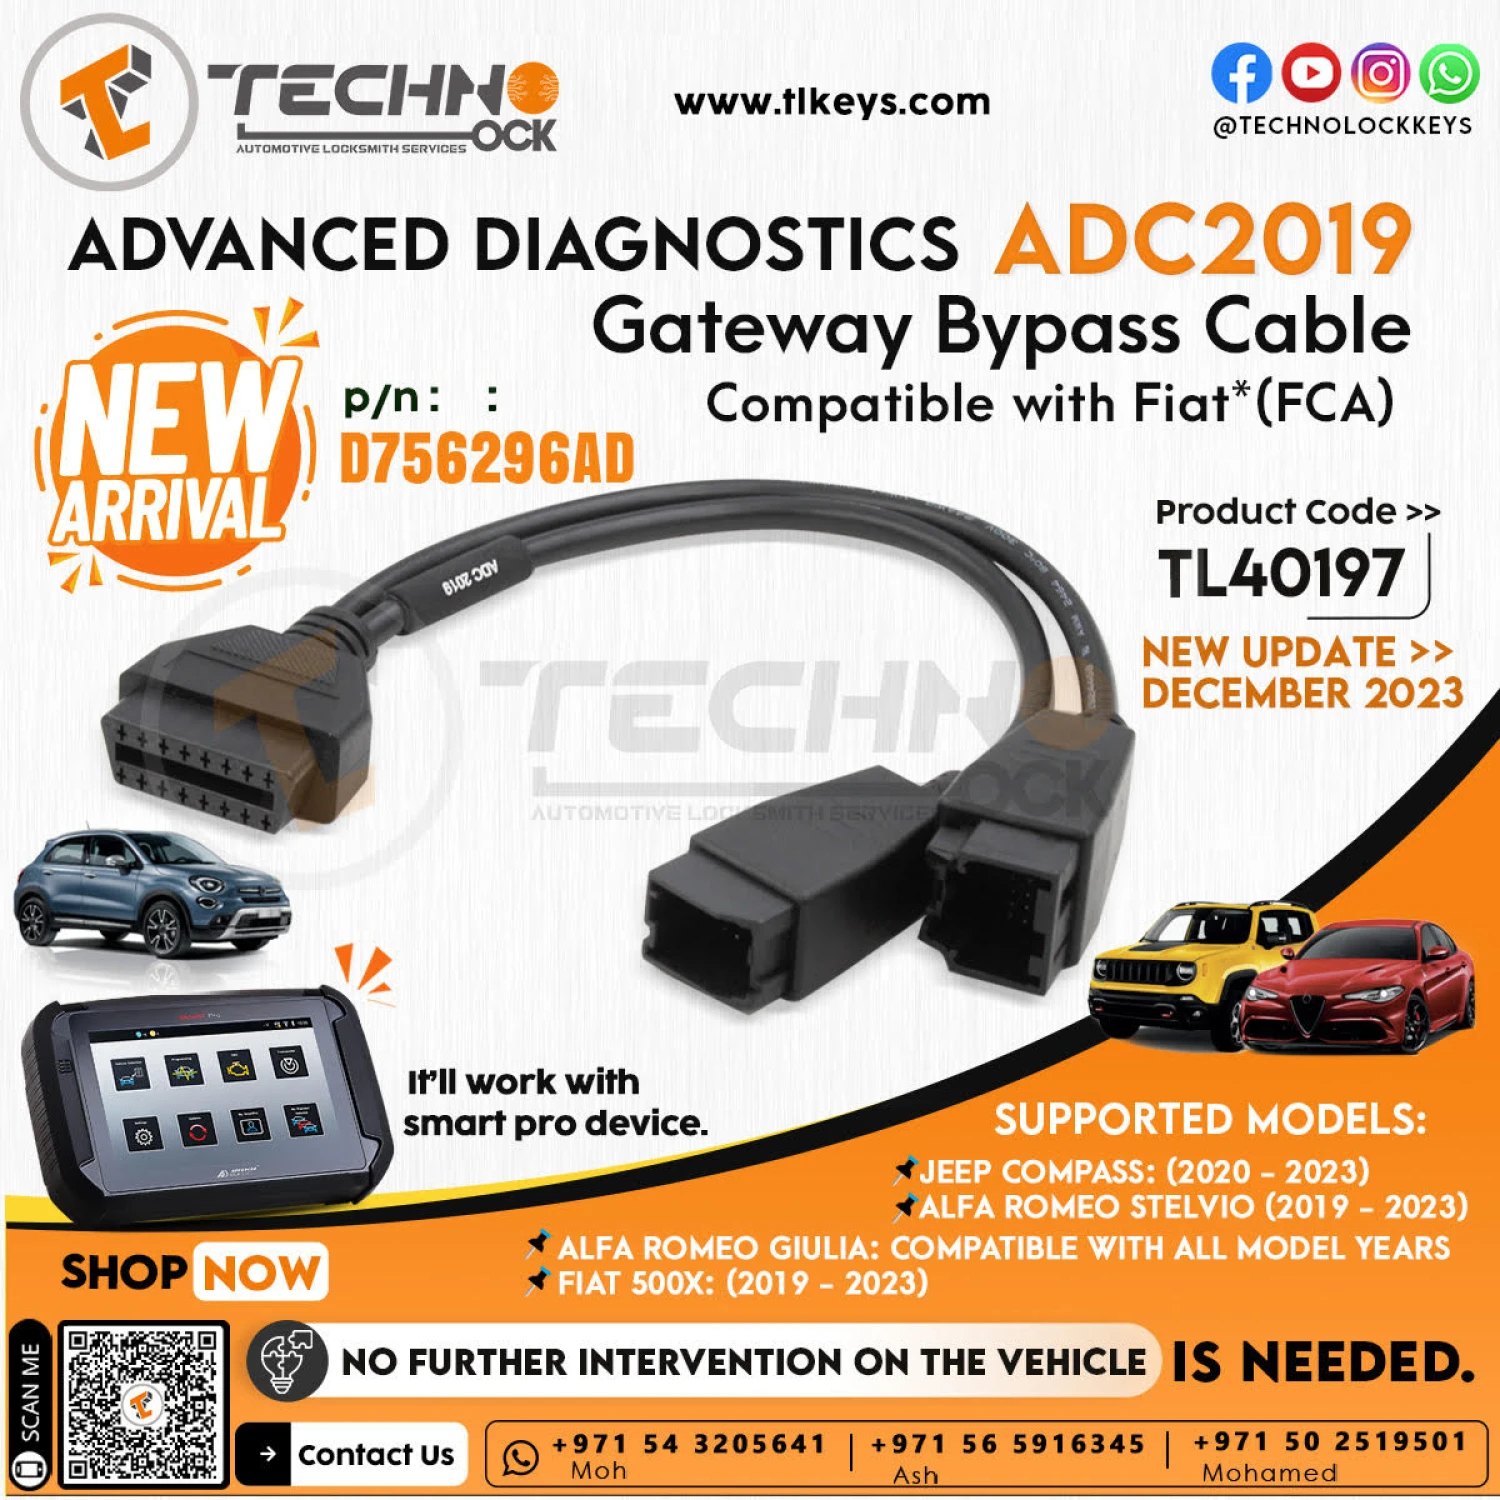  innovative Gateway Bypass Cable designed by Advanced Diagnostics